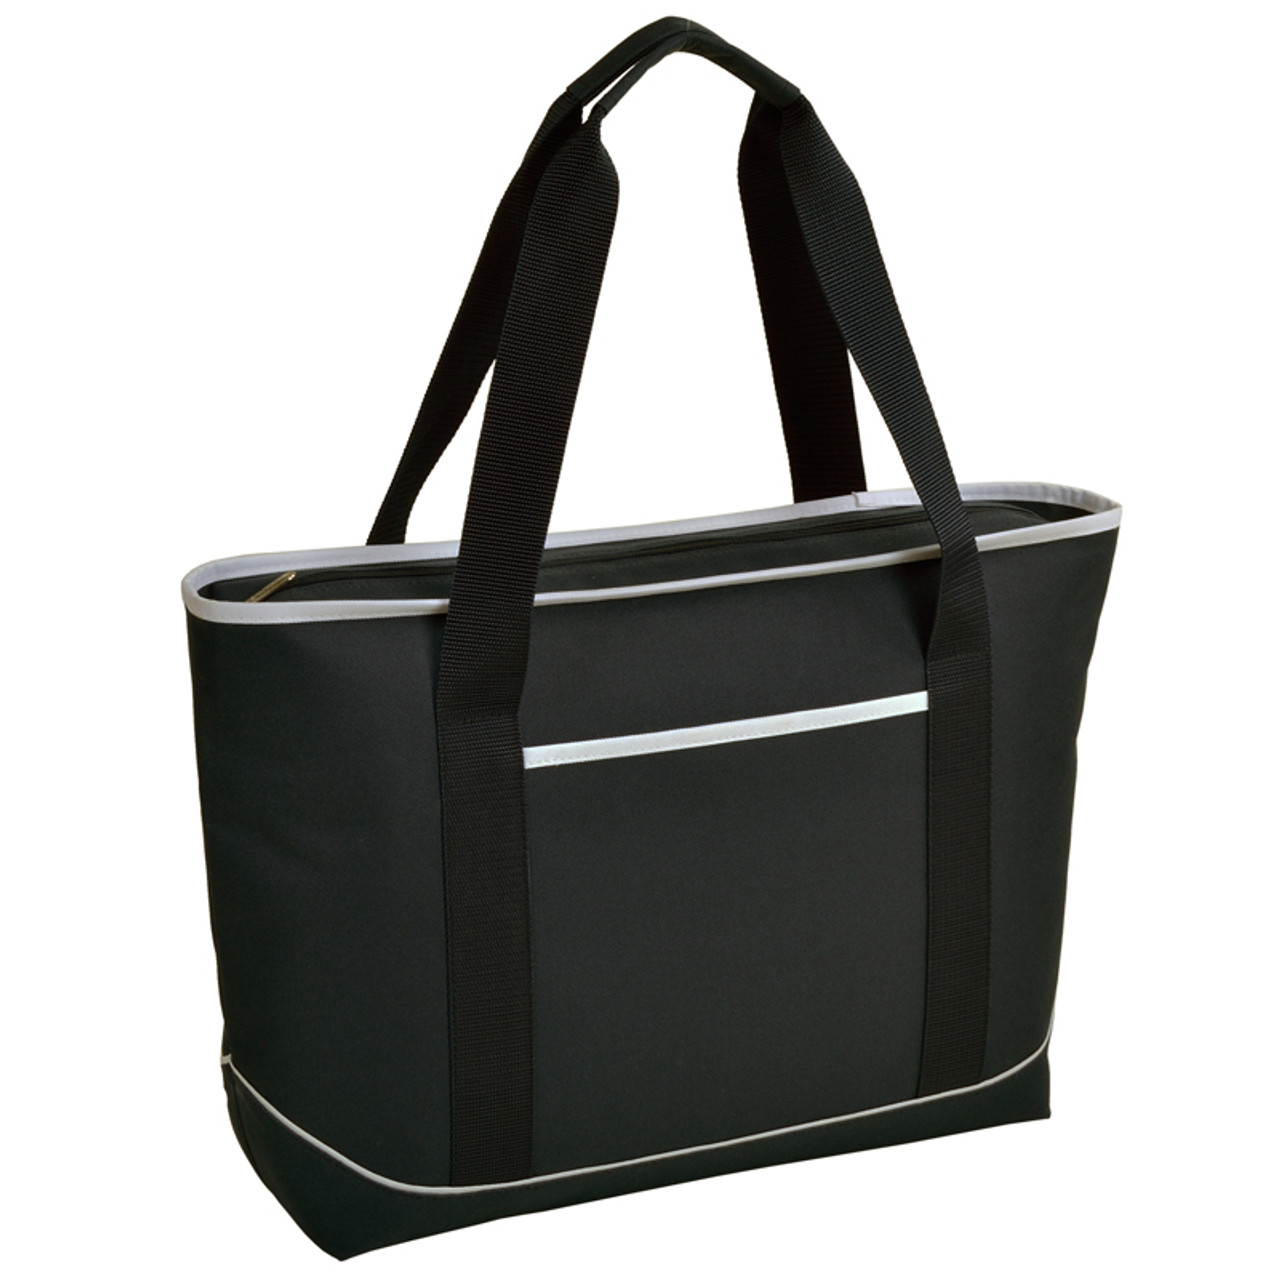 Picnic At Ascot Large Insulated Cooler Tote - Black